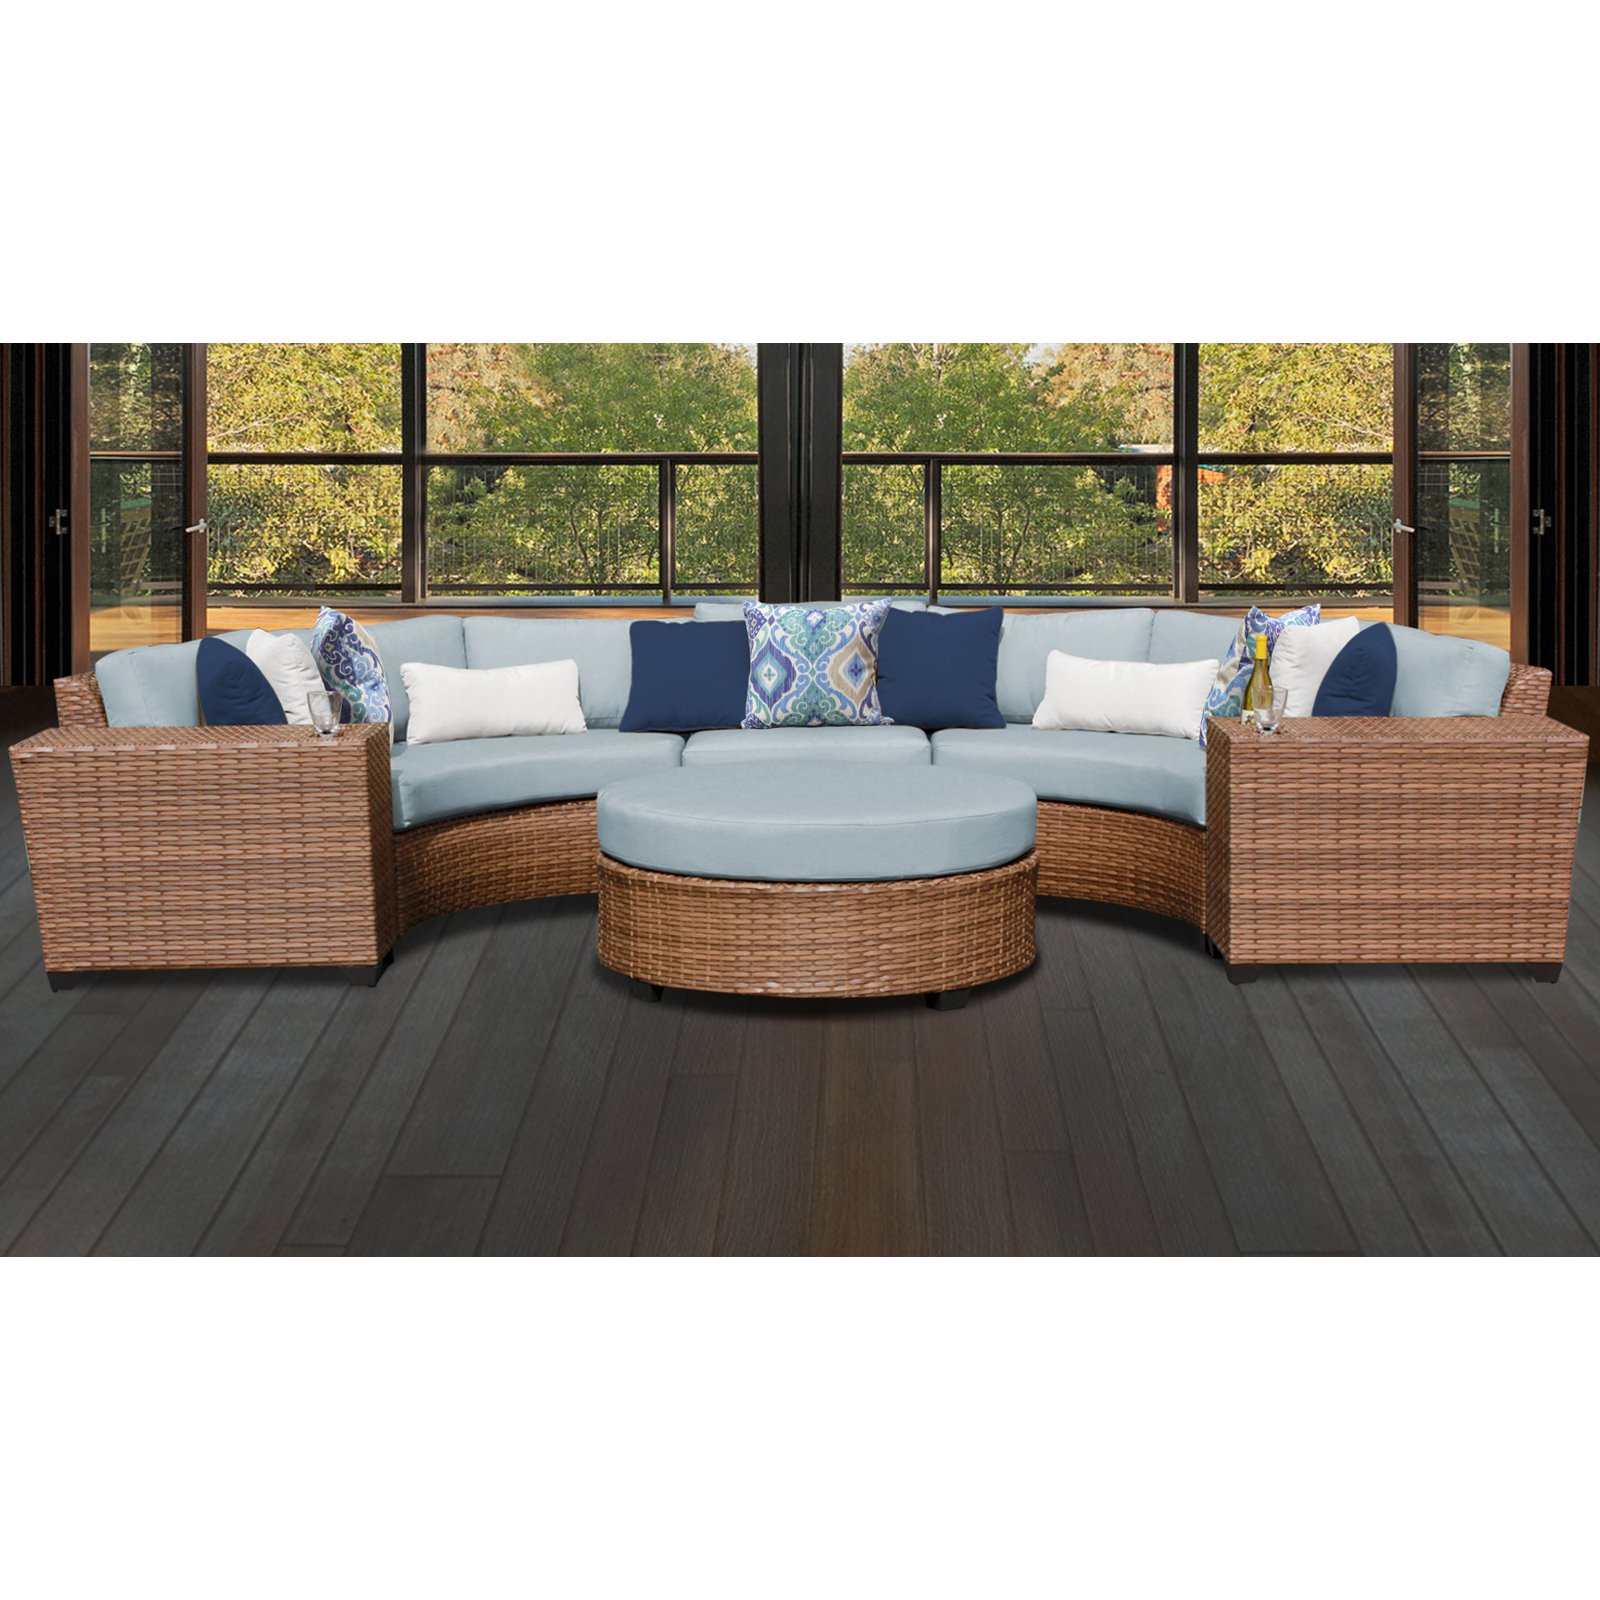 TK Classics Laguna Wicker 6 Piece Patio Conversation Set with Round Coffee Table and 2 Sets of Cushion Covers - image 3 of 3